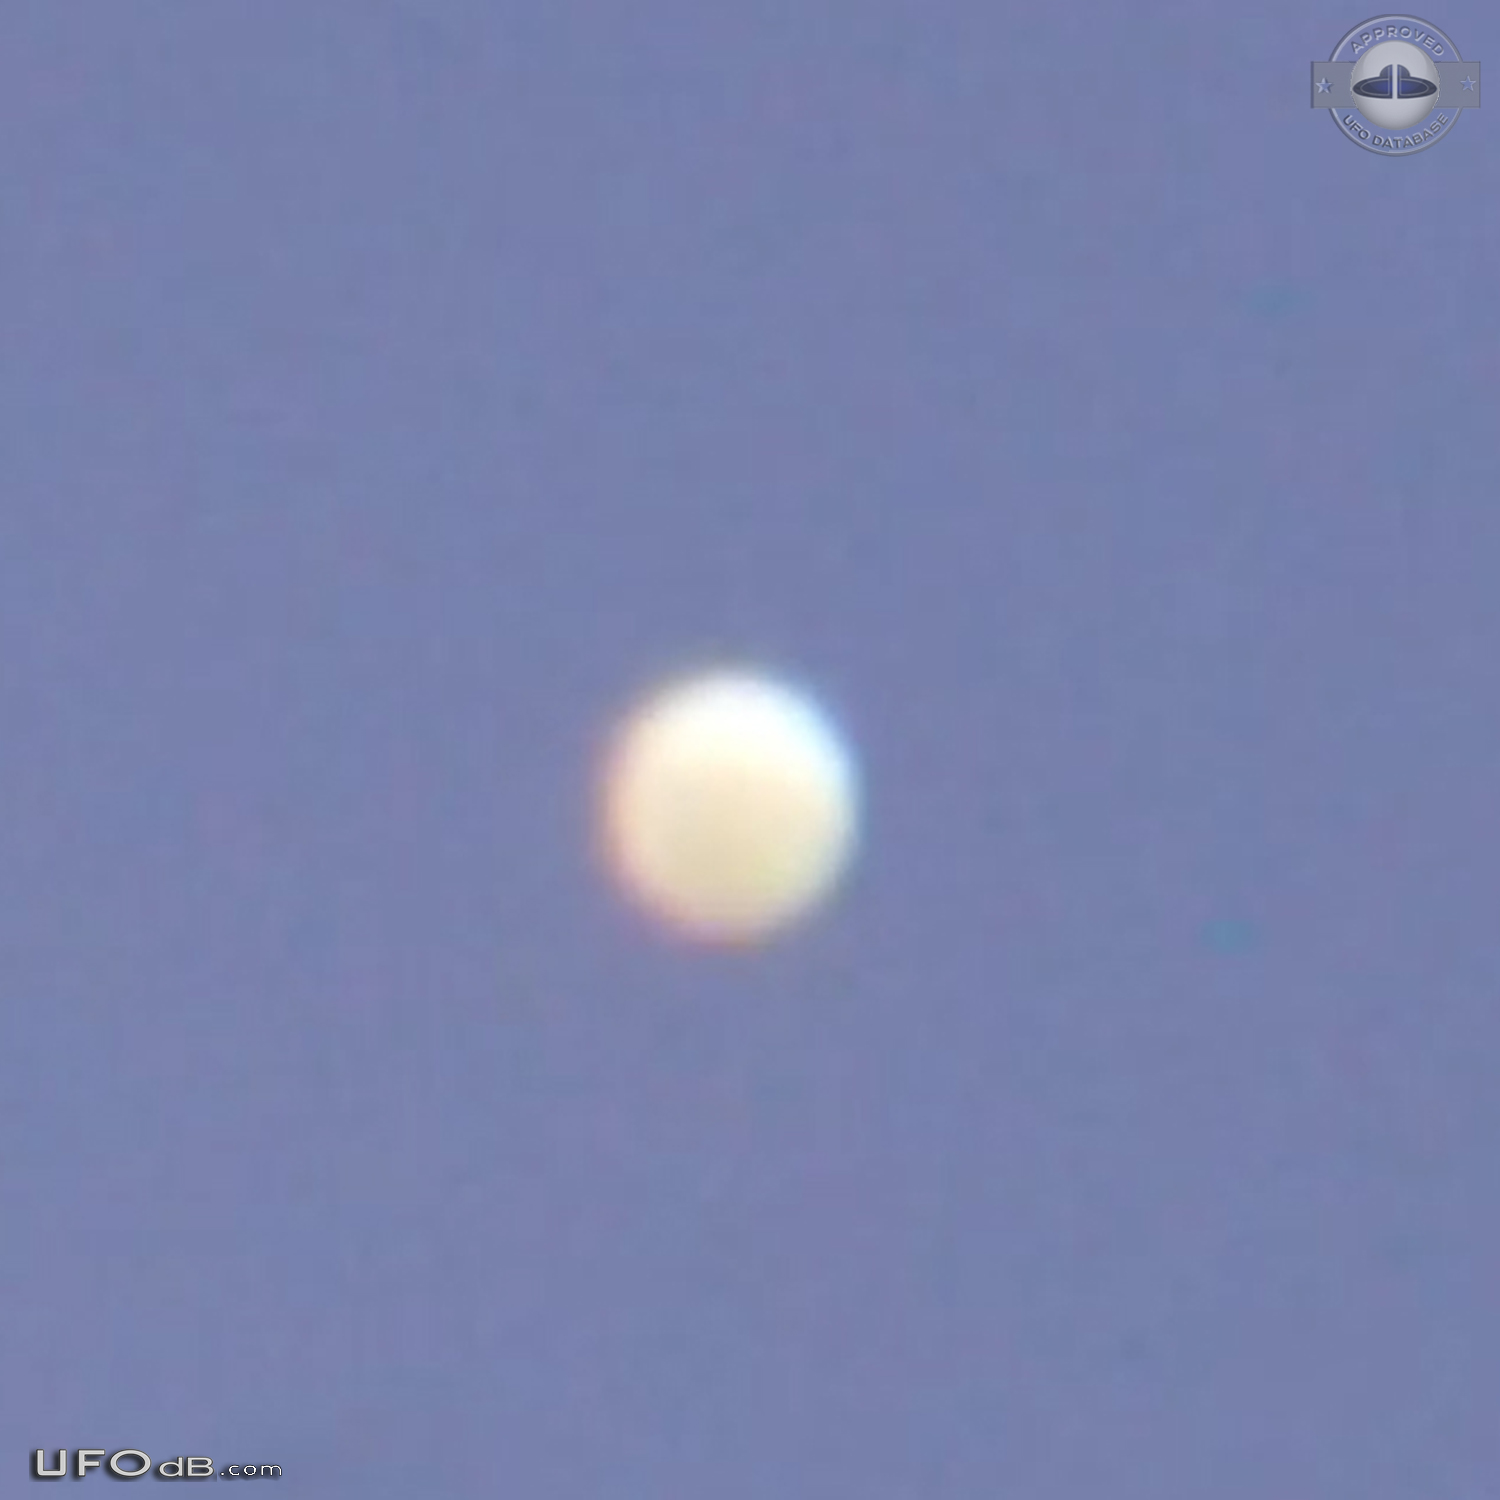 Orb captured with telescope at UFO Sighting Event - California 2016 UFO Picture #788-2